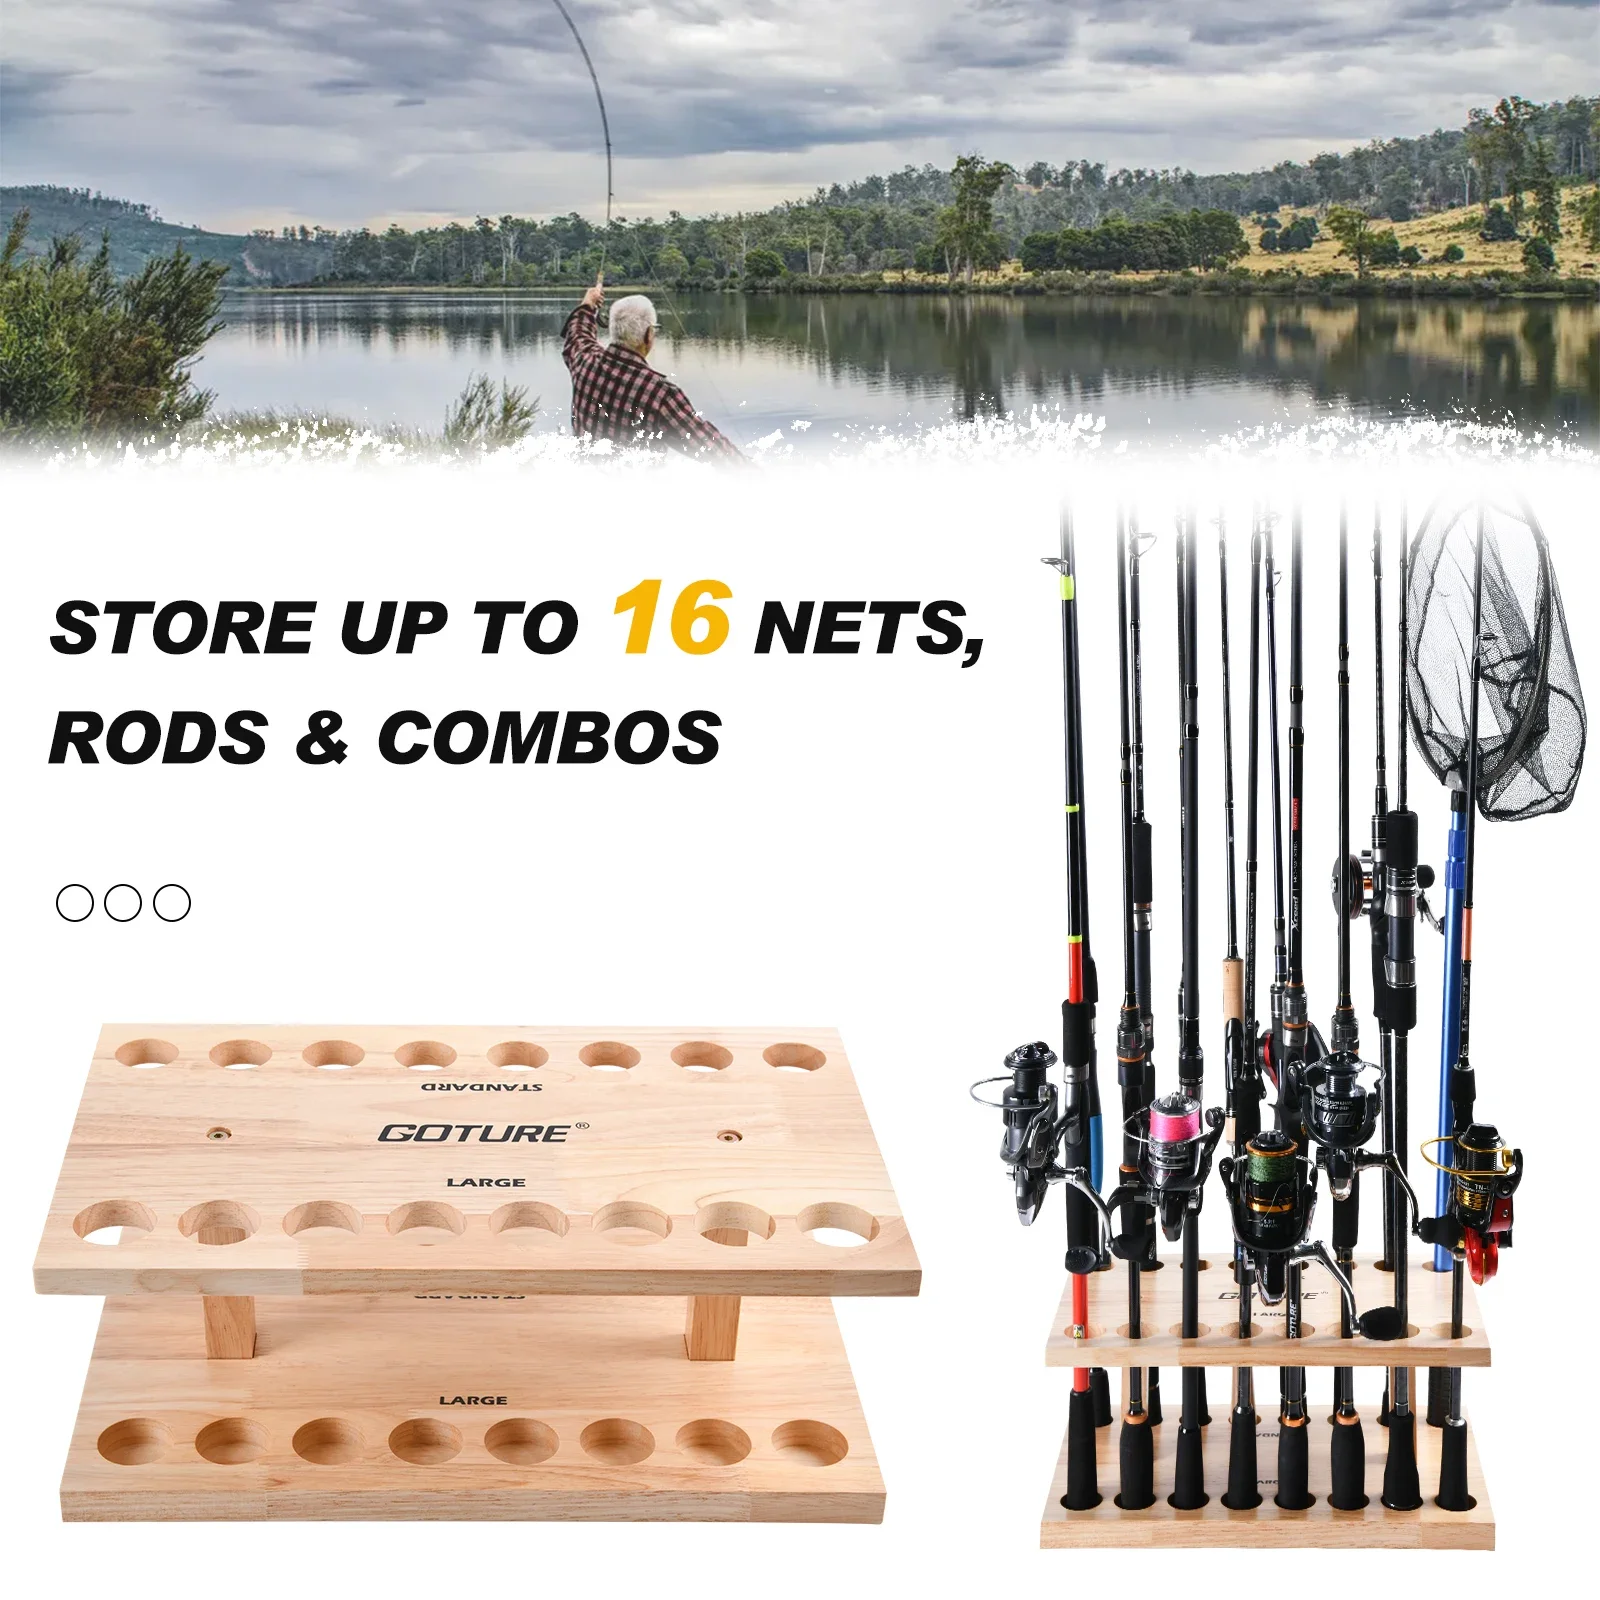 https://ae01.alicdn.com/kf/S3dc1639ad3be4b9fbd041cac41bb3860l/Goture-Fishing-Rod-Holder-Up-to-16-Rods-Vertical-Protect-Storage-Pole-Rack-Display-Stand-Fixed.jpg